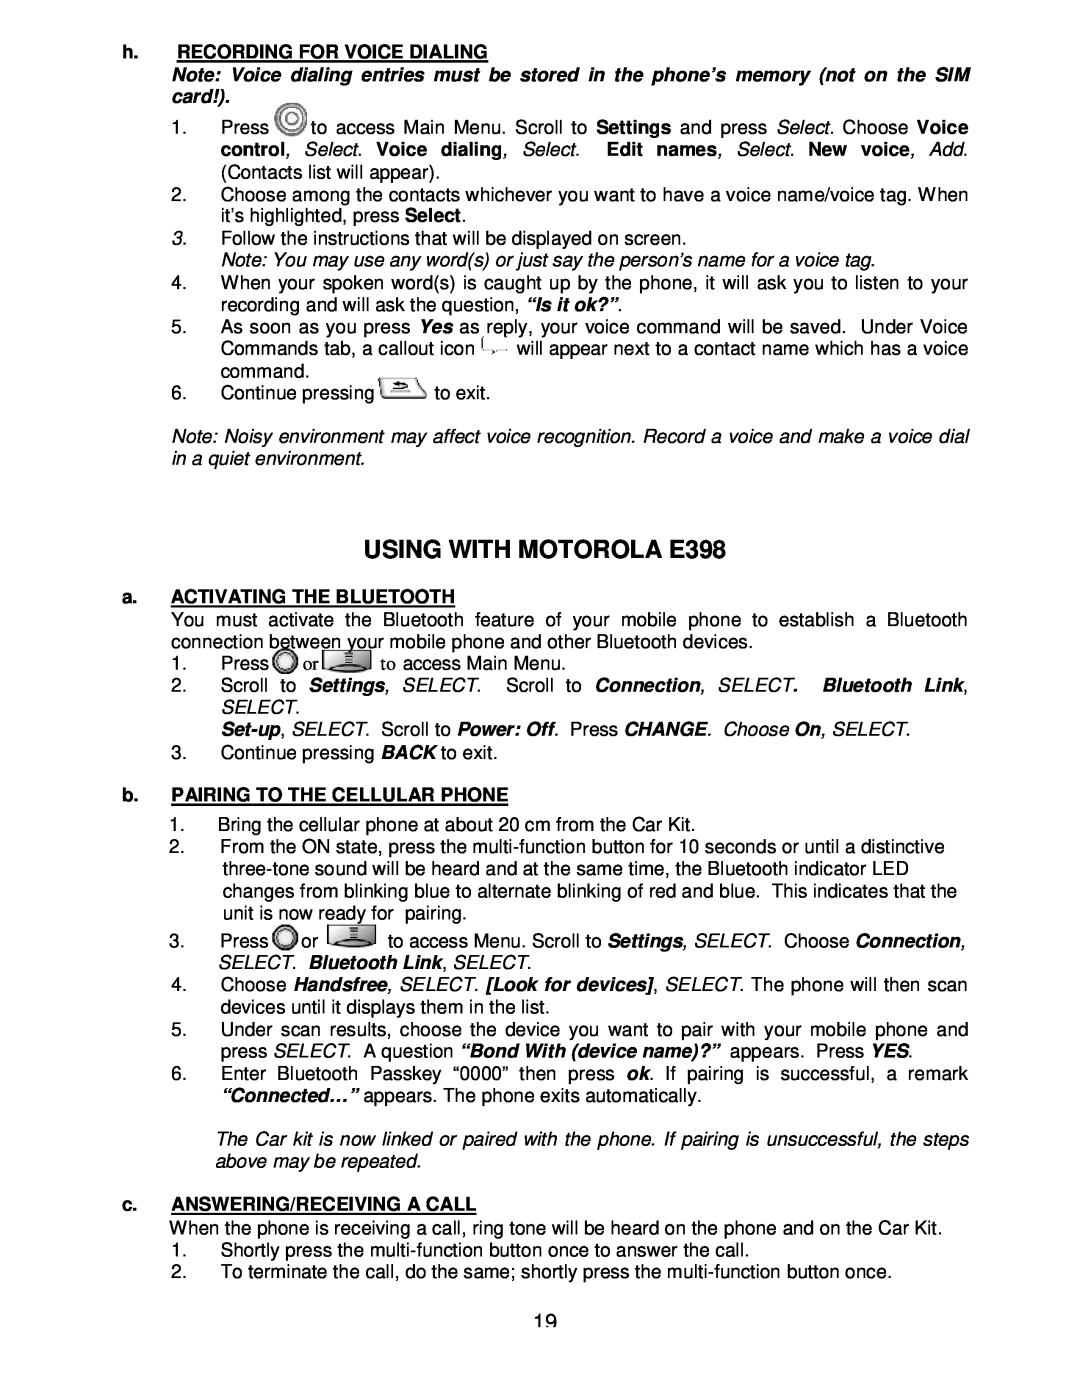 Sony headphone manual USING WITH MOTOROLA E398, h.RECORDING FOR VOICE DIALING, a.ACTIVATING THE BLUETOOTH 